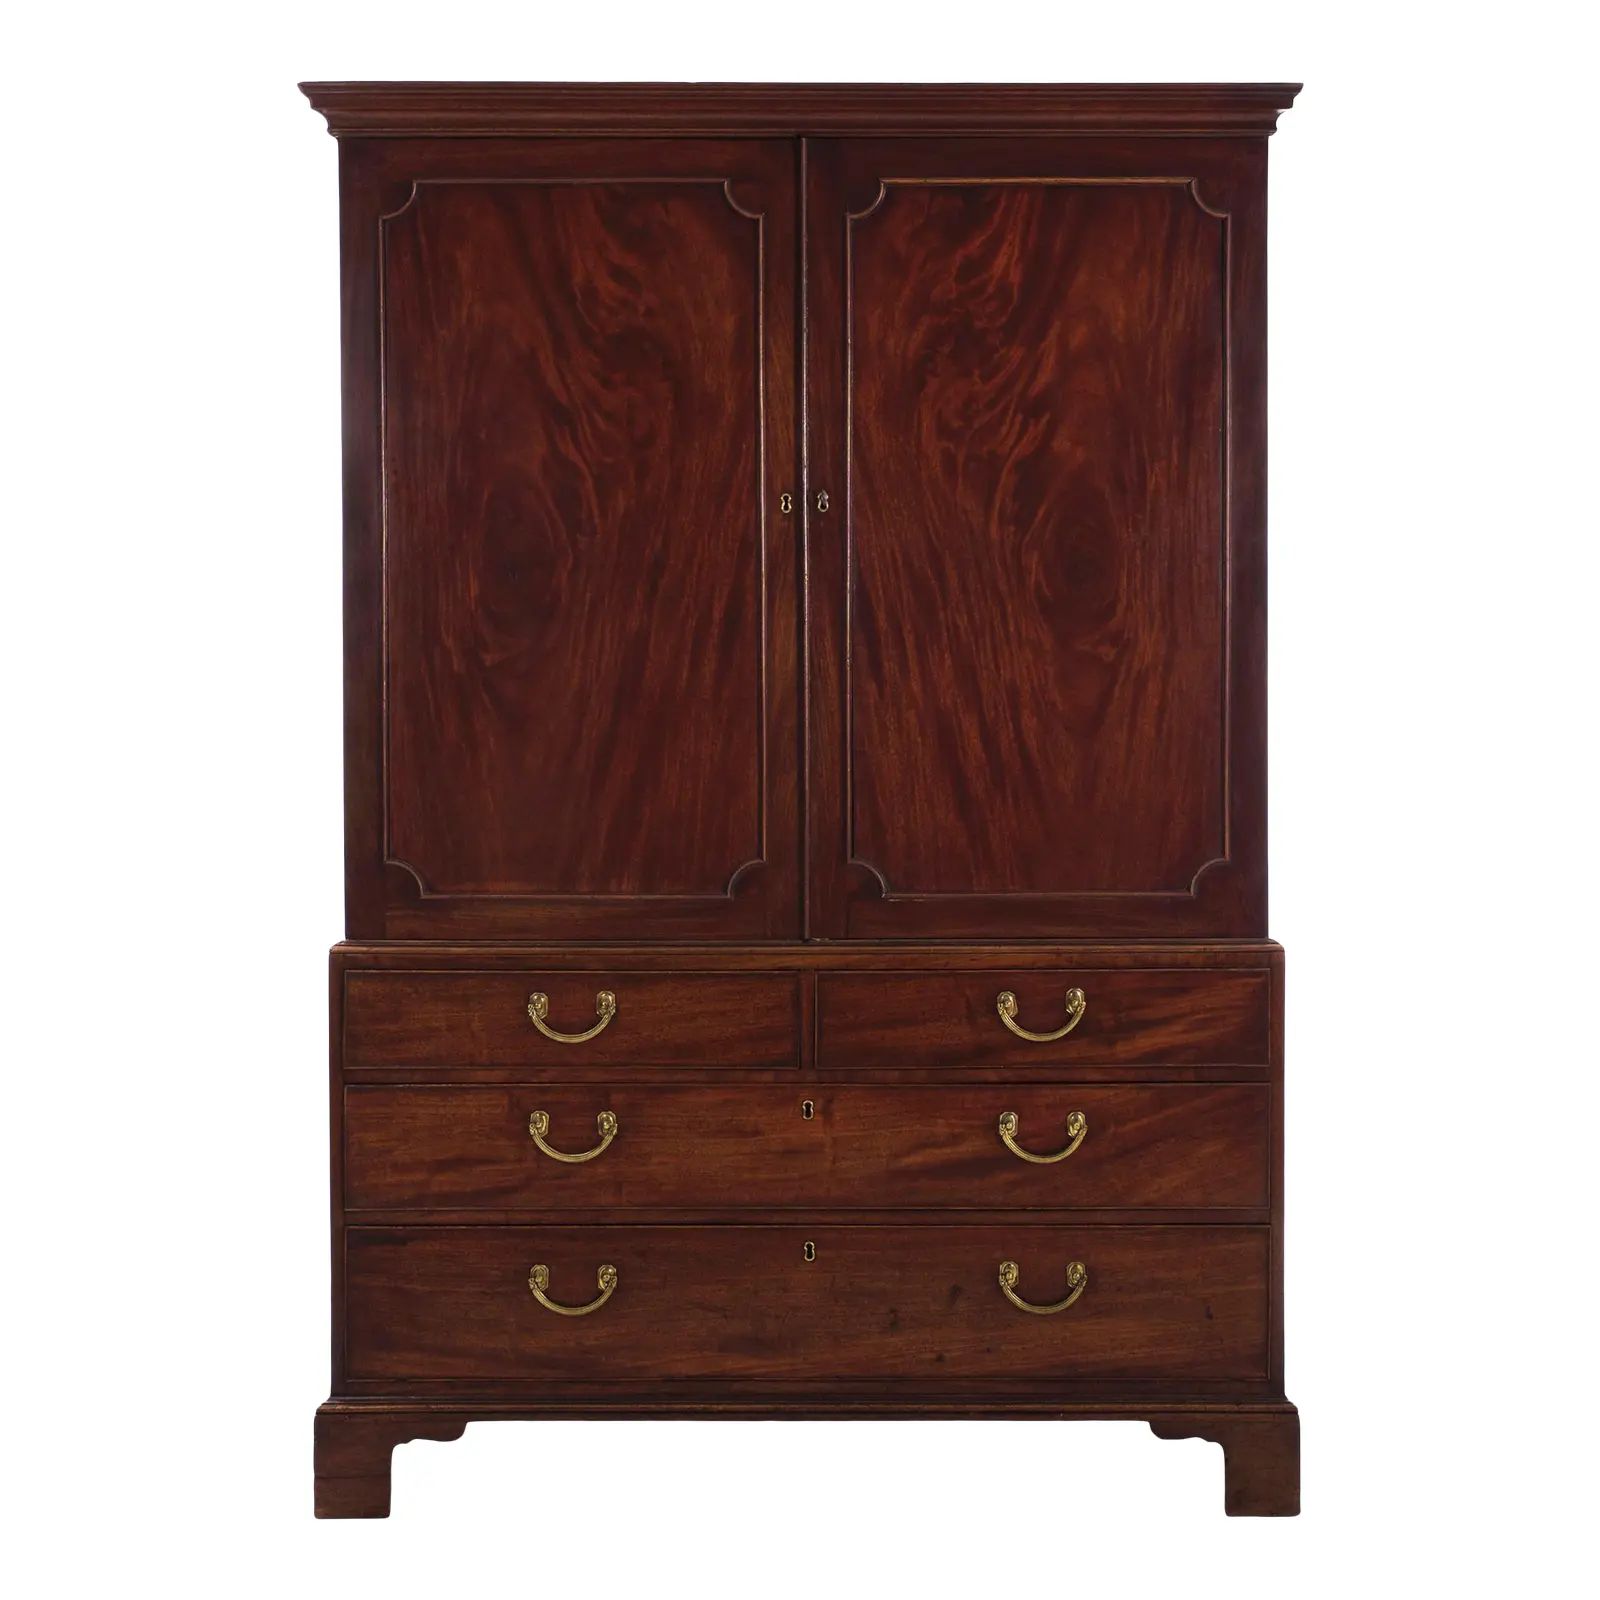 English George III Mahogany Antique Linen Press Armoire Over Chest of Drawers Circa 1800 | Chairish